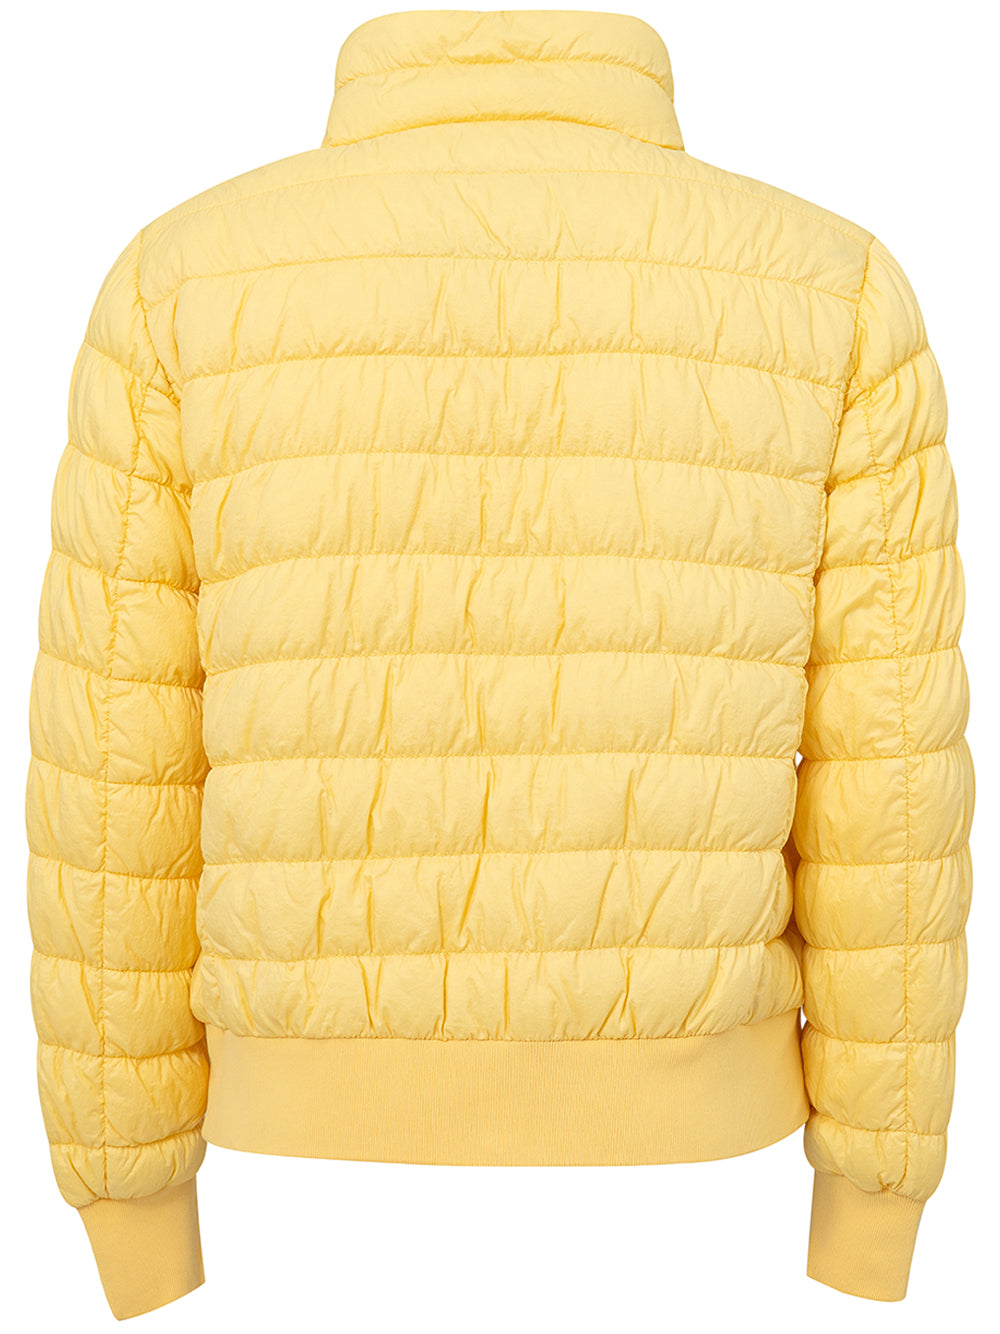 Woolrich padded jacket in yellow